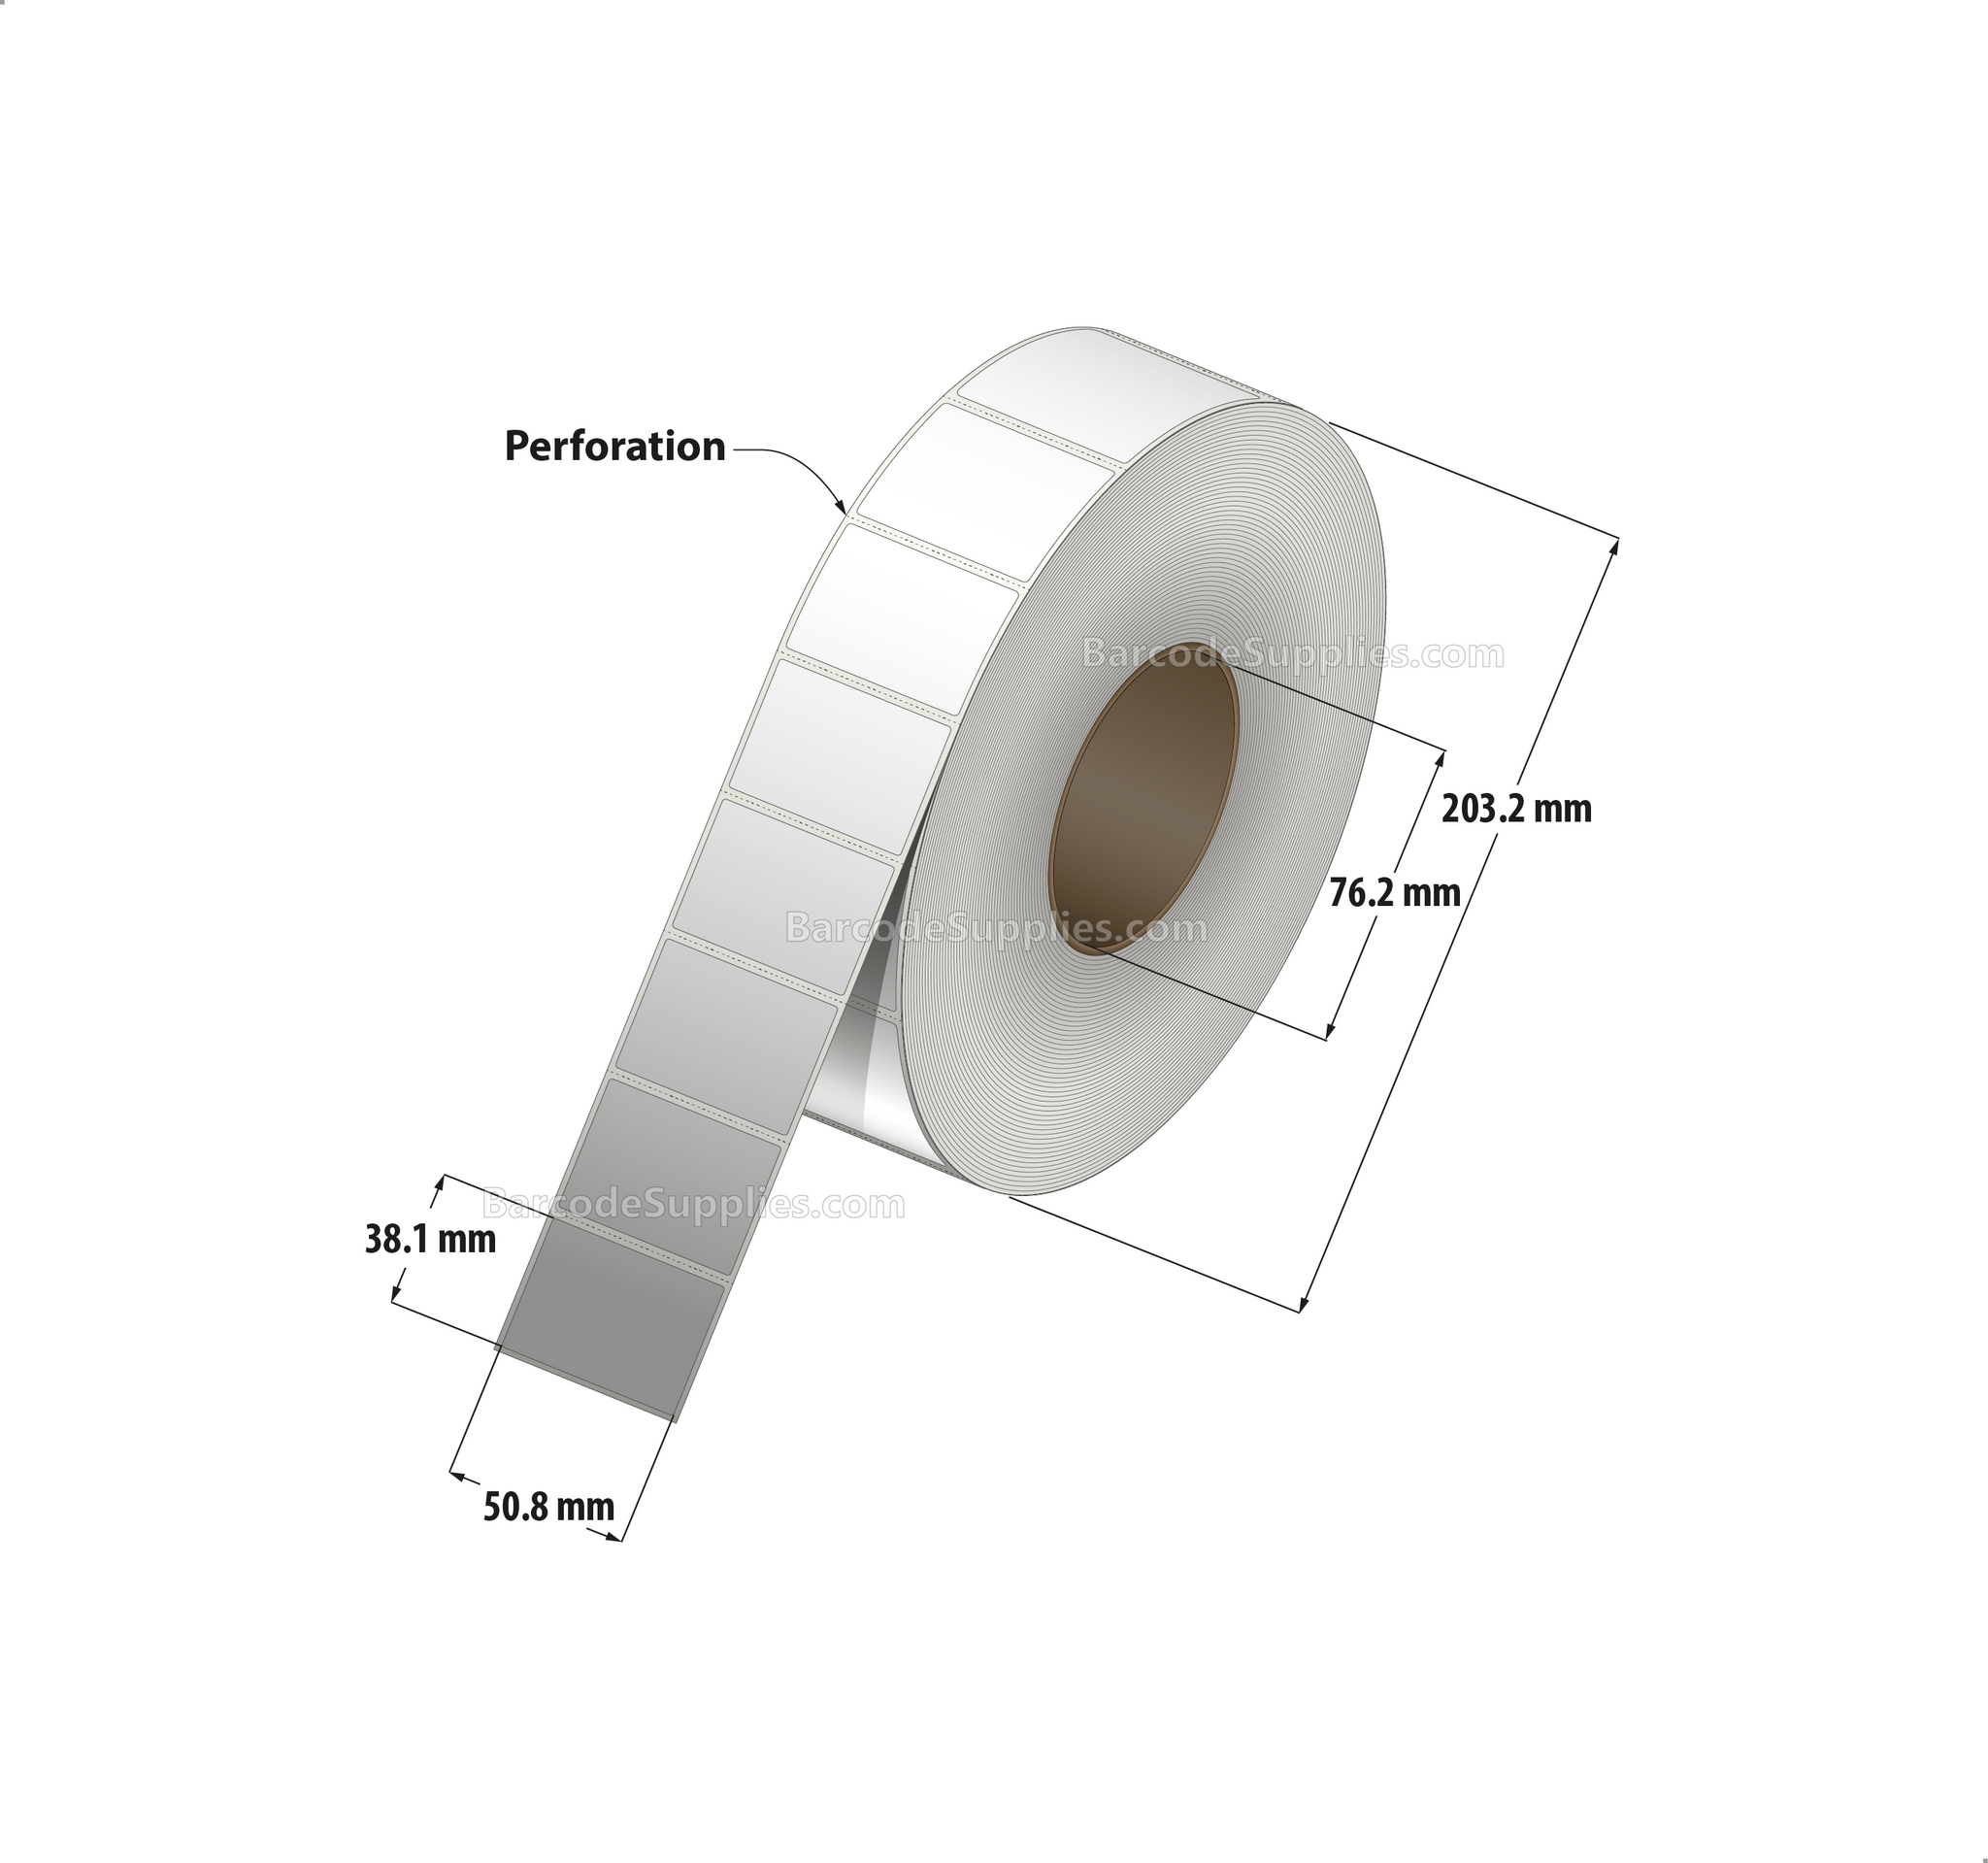 2 x 1.5 Thermal Transfer White Labels With Permanent Adhesive - Perforated - 3600 Labels Per Roll - Carton Of 8 Rolls - 28800 Labels Total - MPN: RT-2-15-3600-3